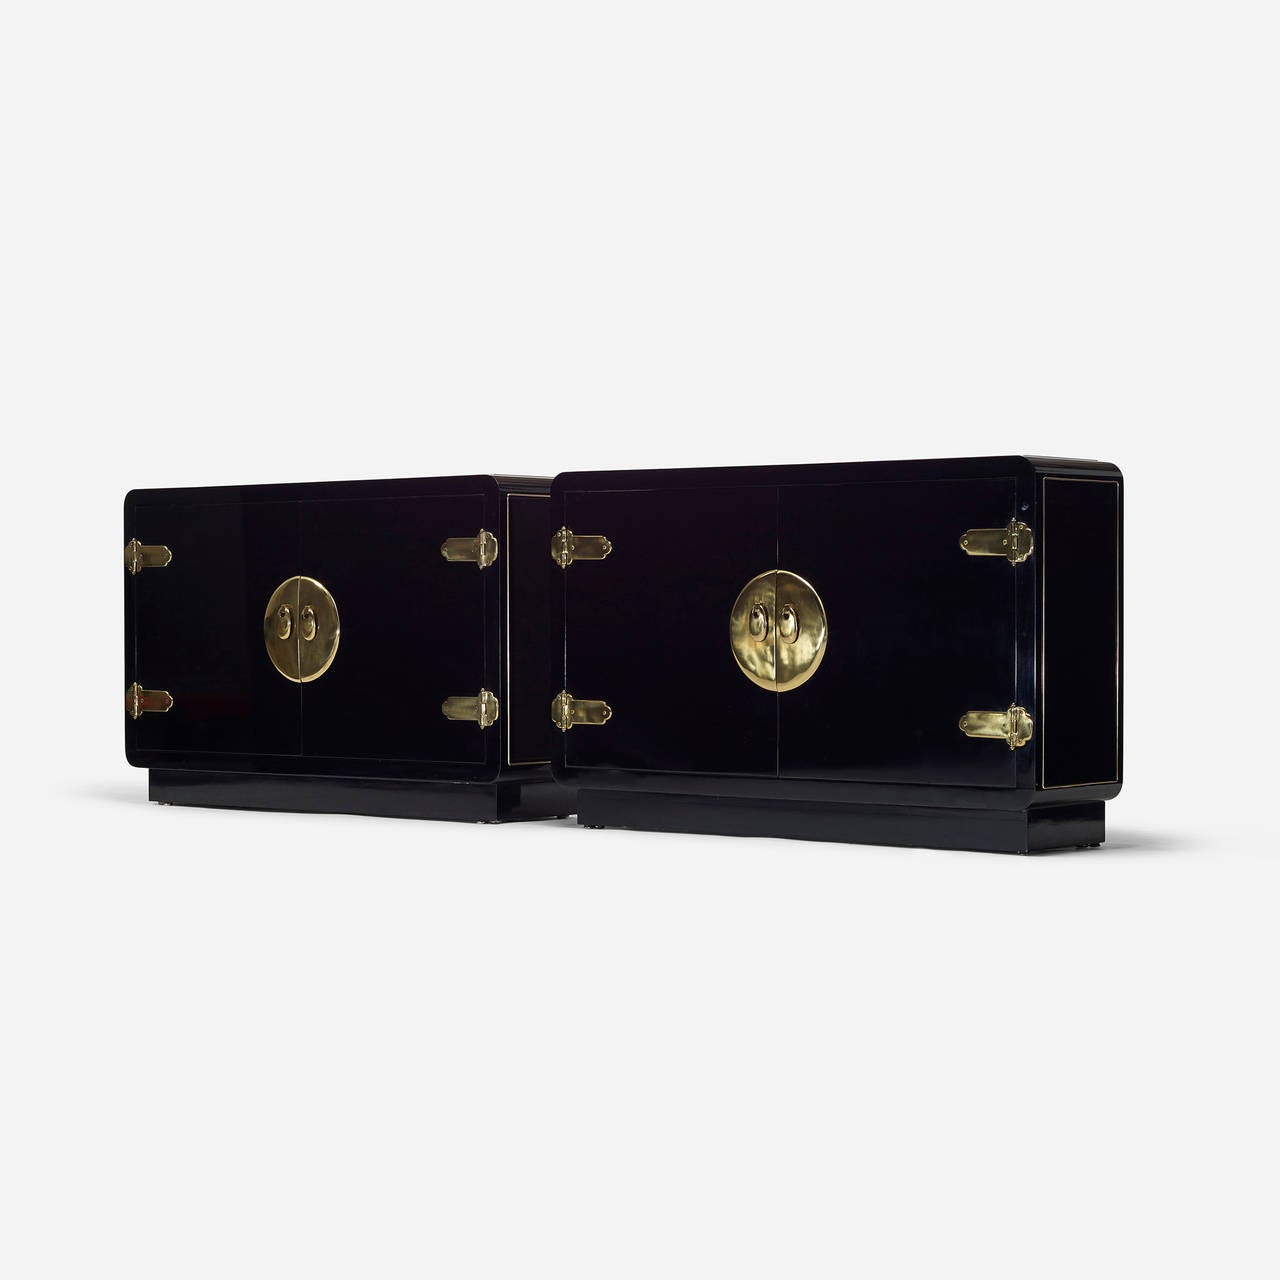 Each cabinet features two doors and one adjustable shelf. Signed with applied brass manufacturer's label to reverse of each: [Mastercraft of Grand Rapids].